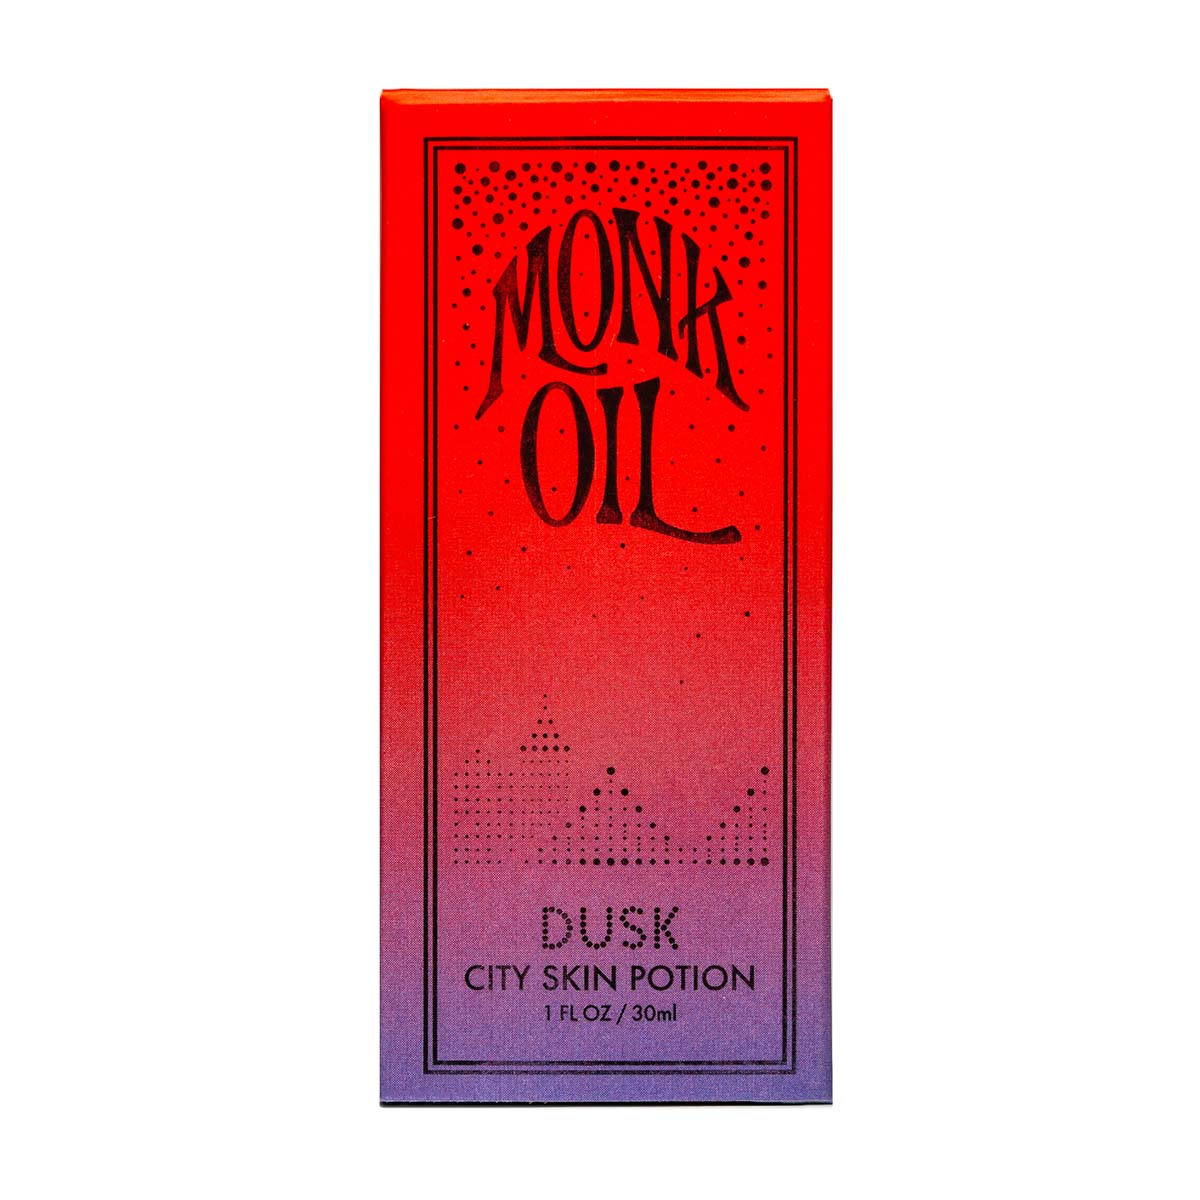 Dusk City Skin Potion | Monk Oil | Raw Living UK | Perfume | Natural Fragrance | Monk Oil Dusk City Skin Potion is a natural blend of essential oils designed to encourage passion, determination &amp; an inner-knowing. Can be used as a perfume.